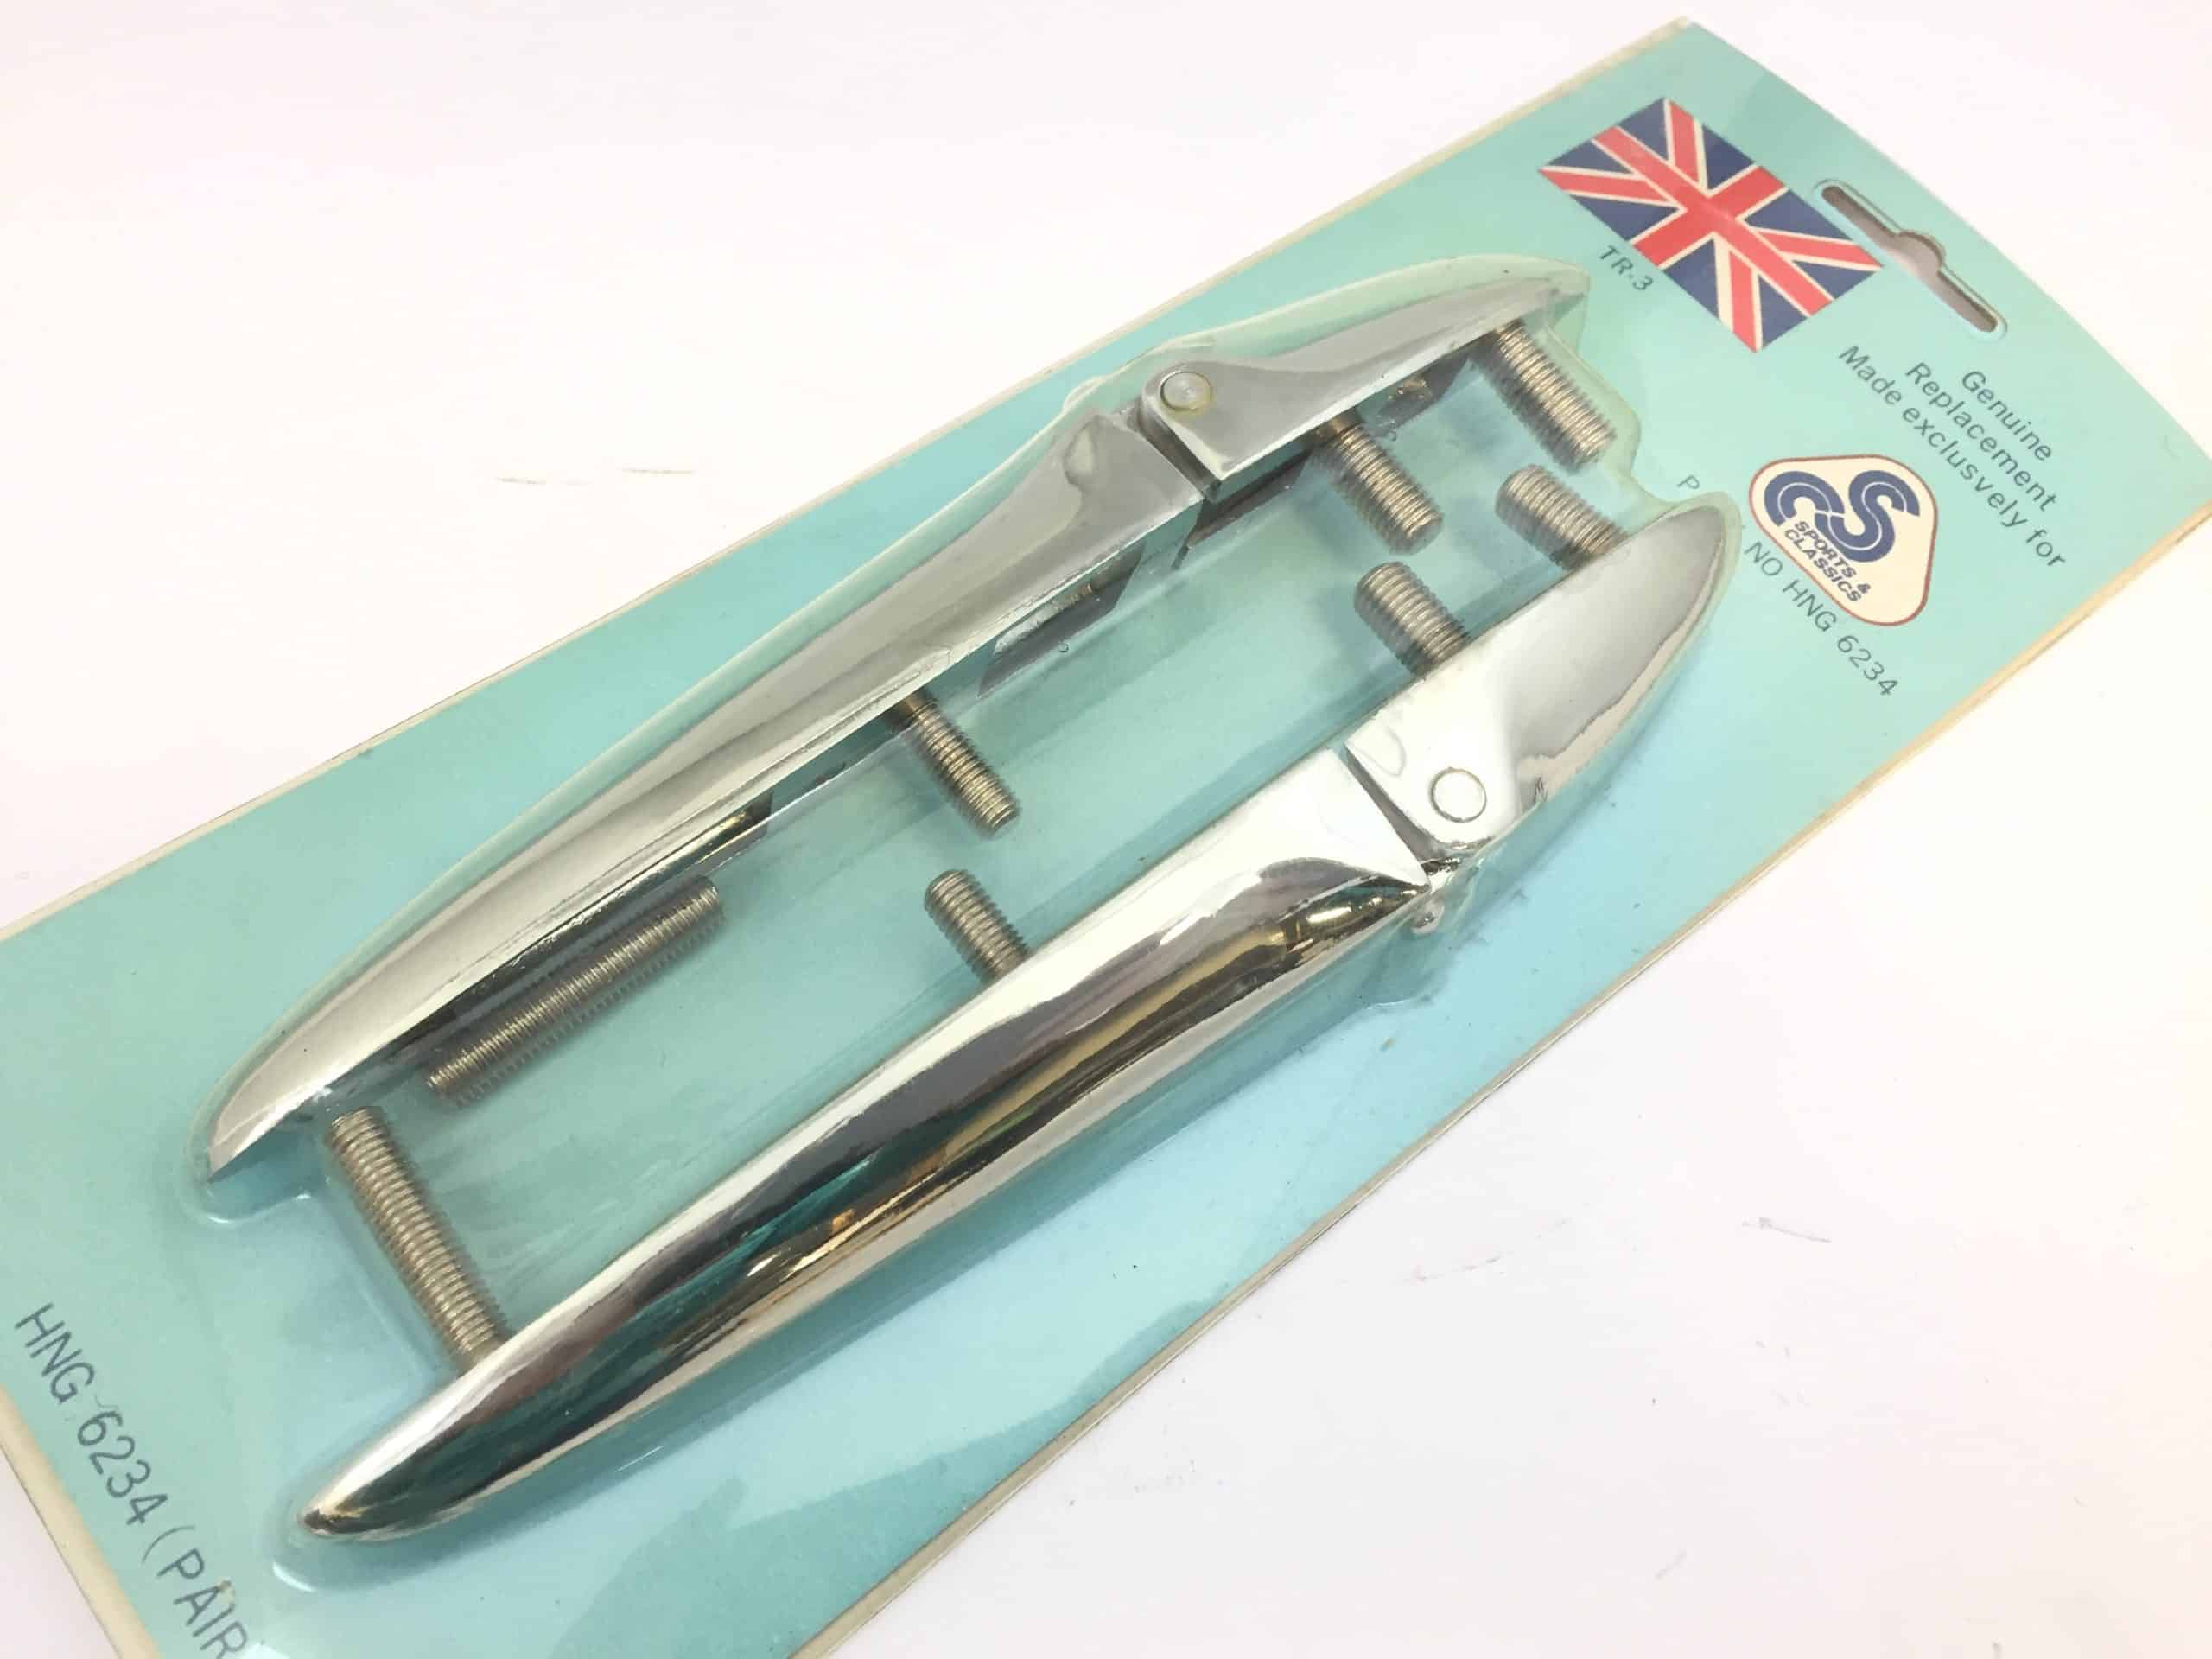 NEW TRIUMPH SPITFIRE HERALD CHROME  BOOT HINGES PAIR